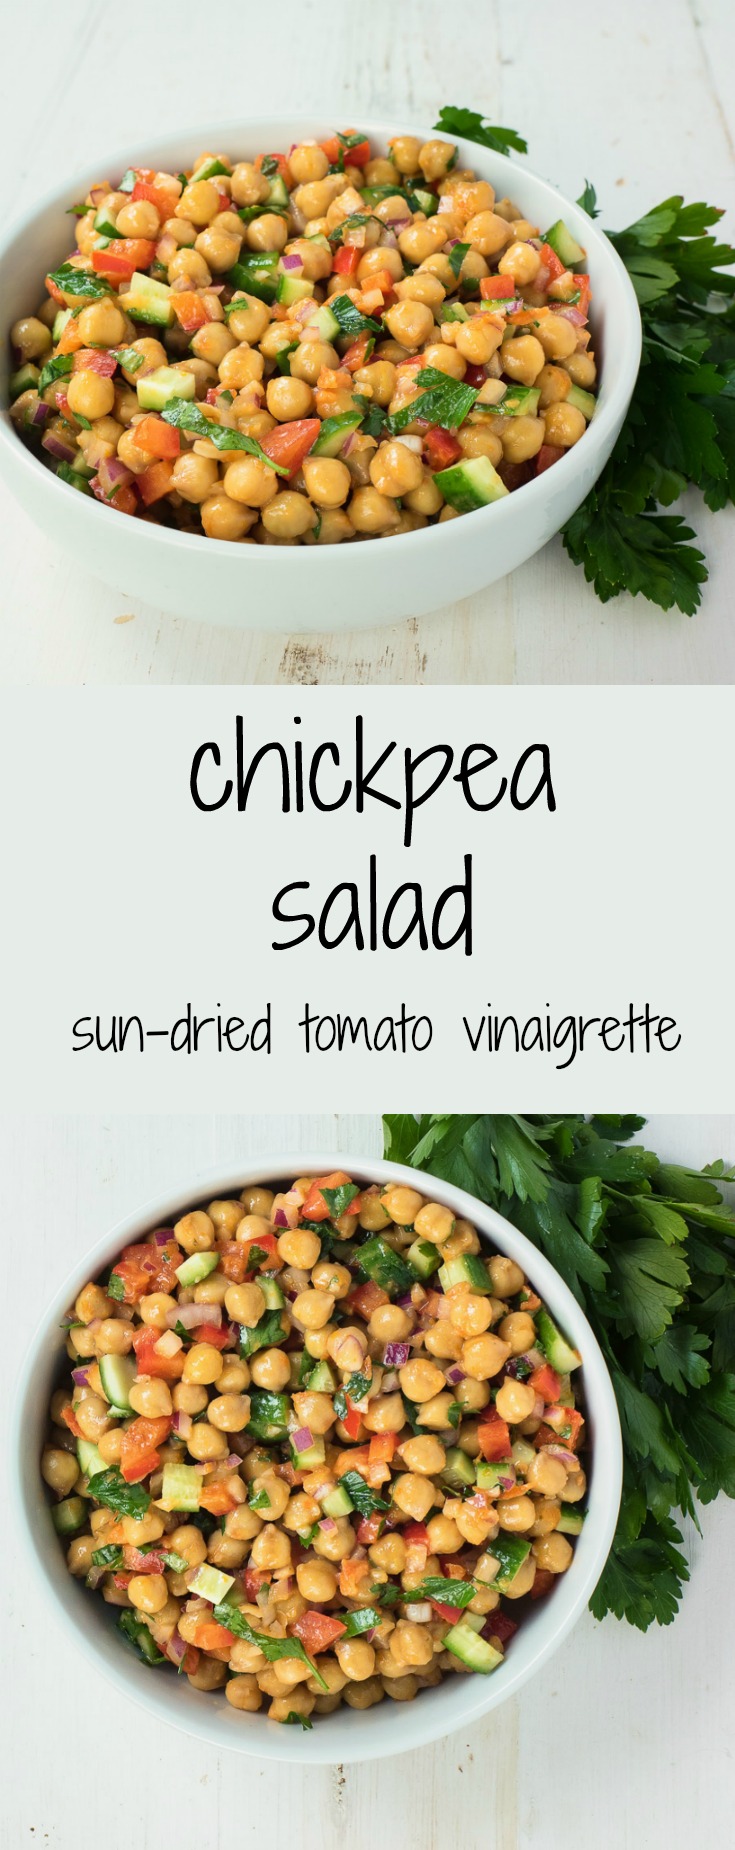 Chickpea salad with sun-dried tomato vinaigrette is the perfect summer side dish.